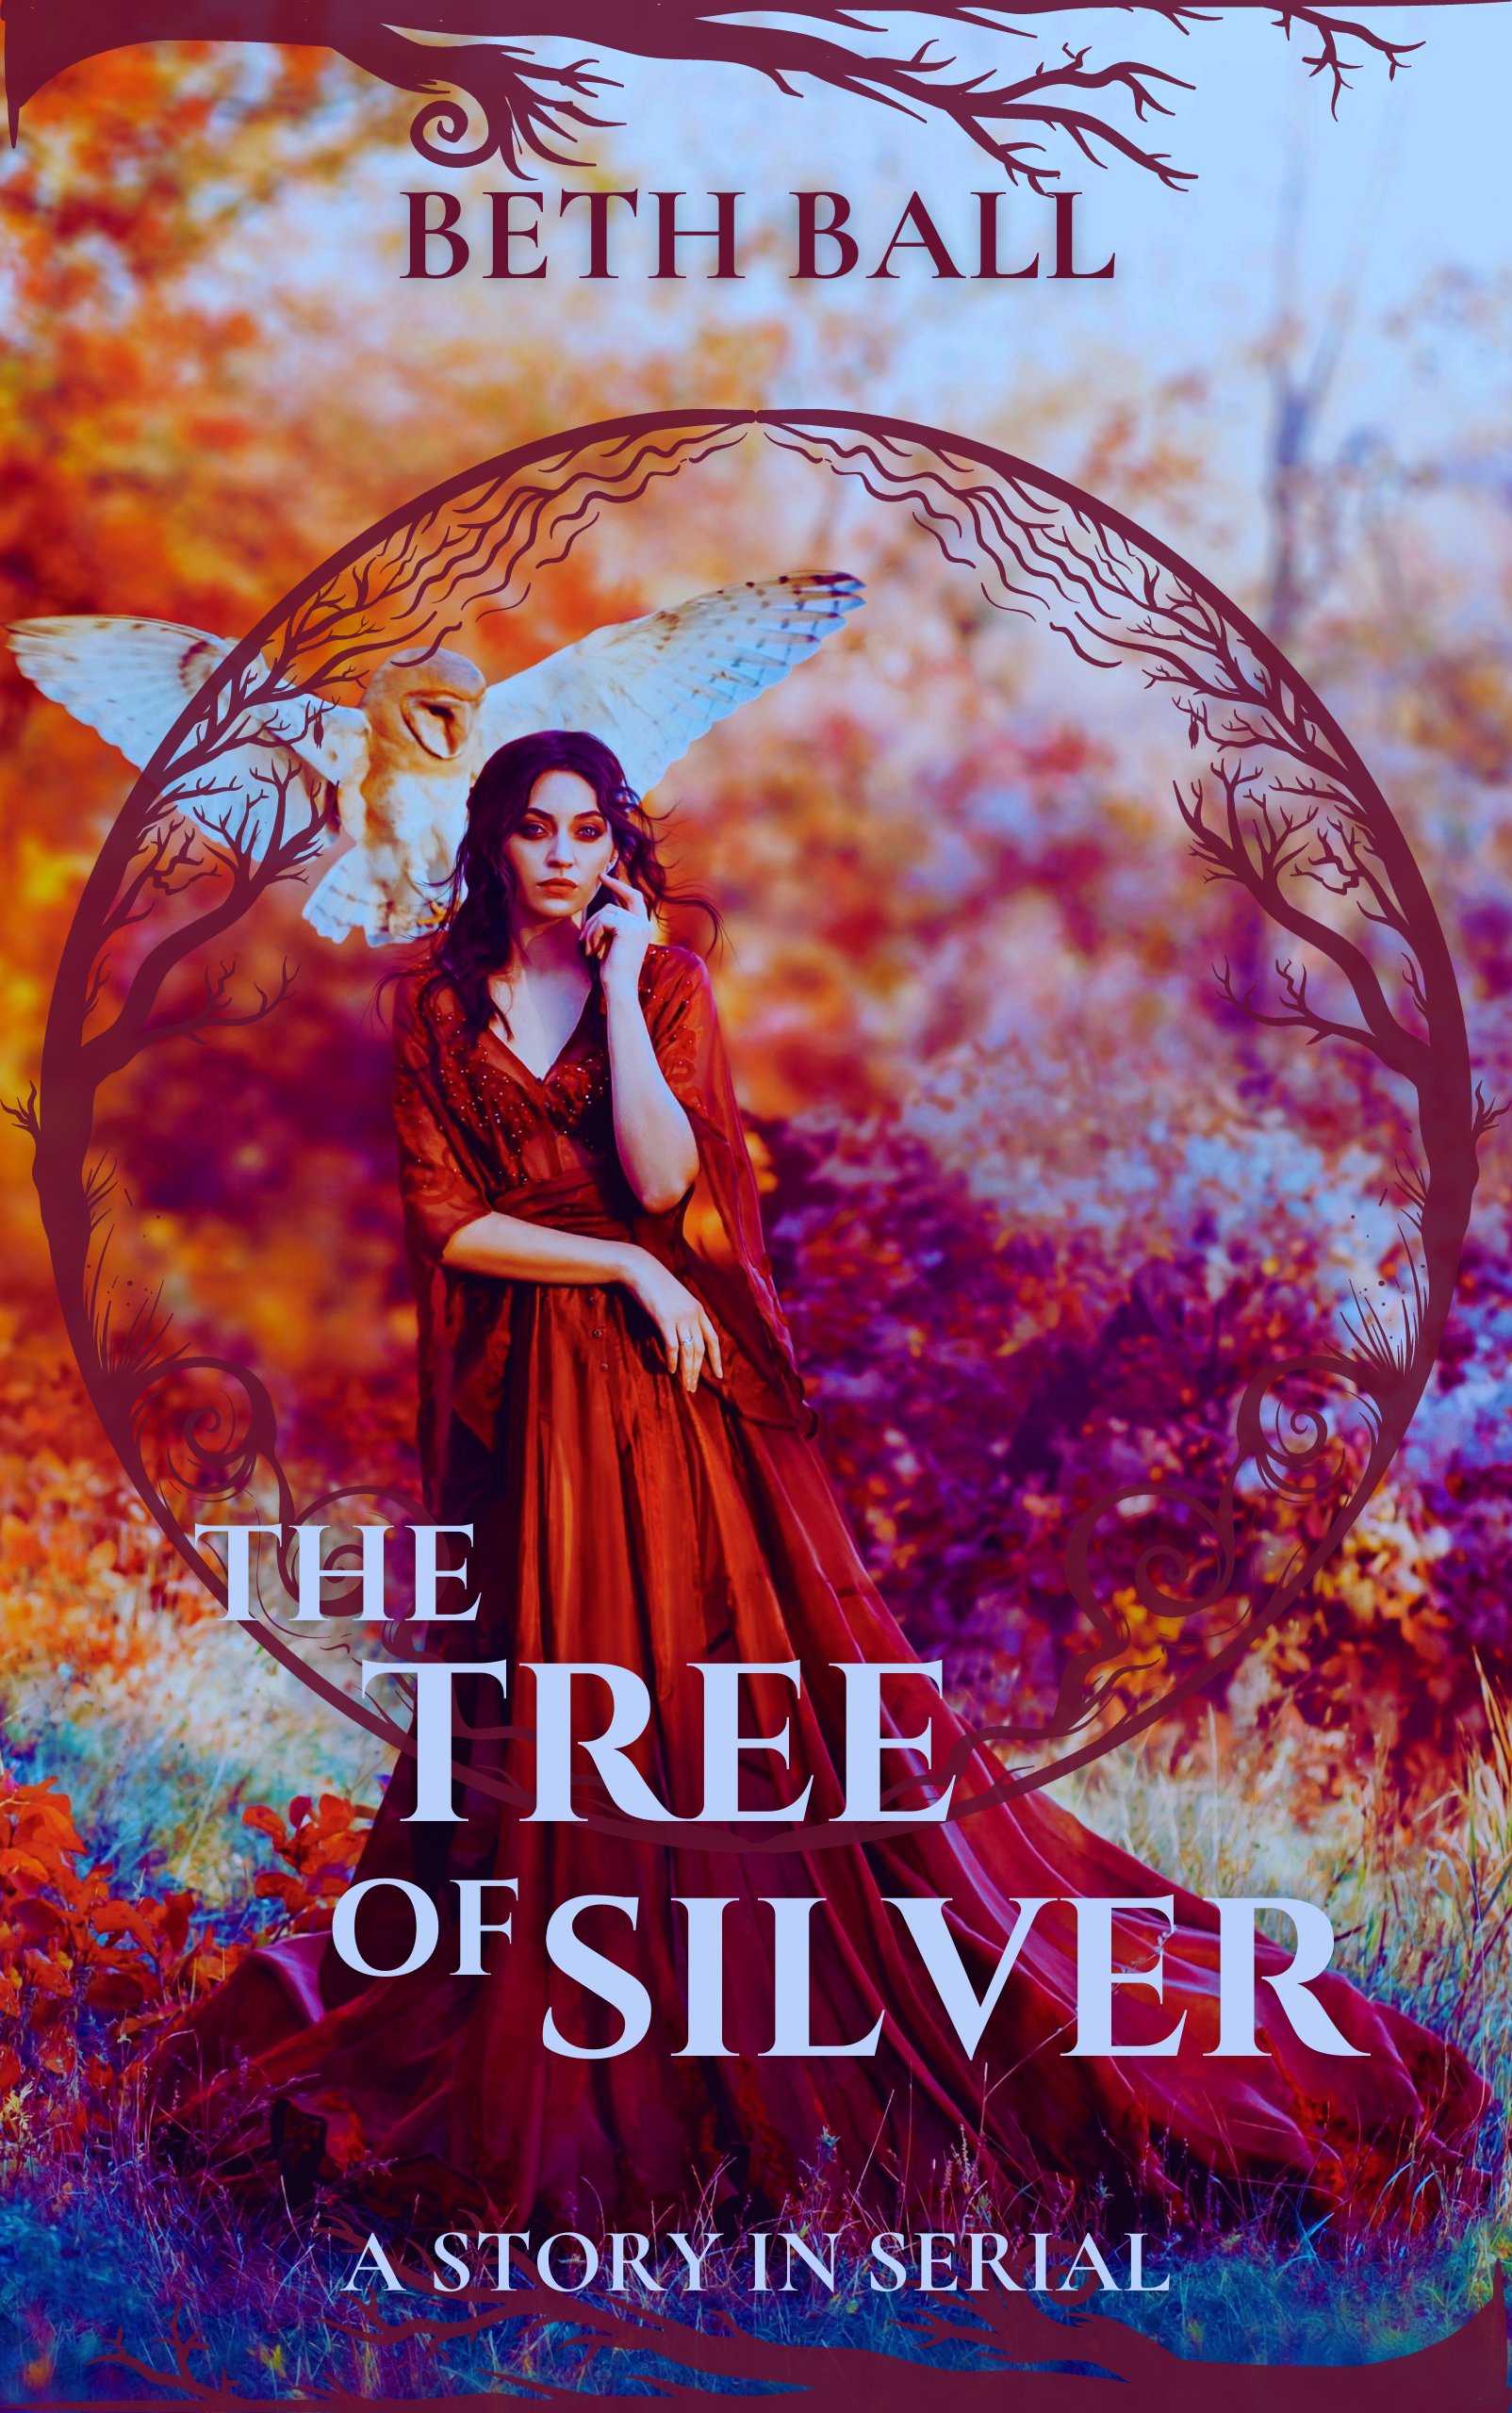 fantasy book cover showing a woman standing in front of a colorful forest landscape with an owl landing on her shoulder and text overlay that reads The Tree of Silver: a Story in Serial by Beth Ball